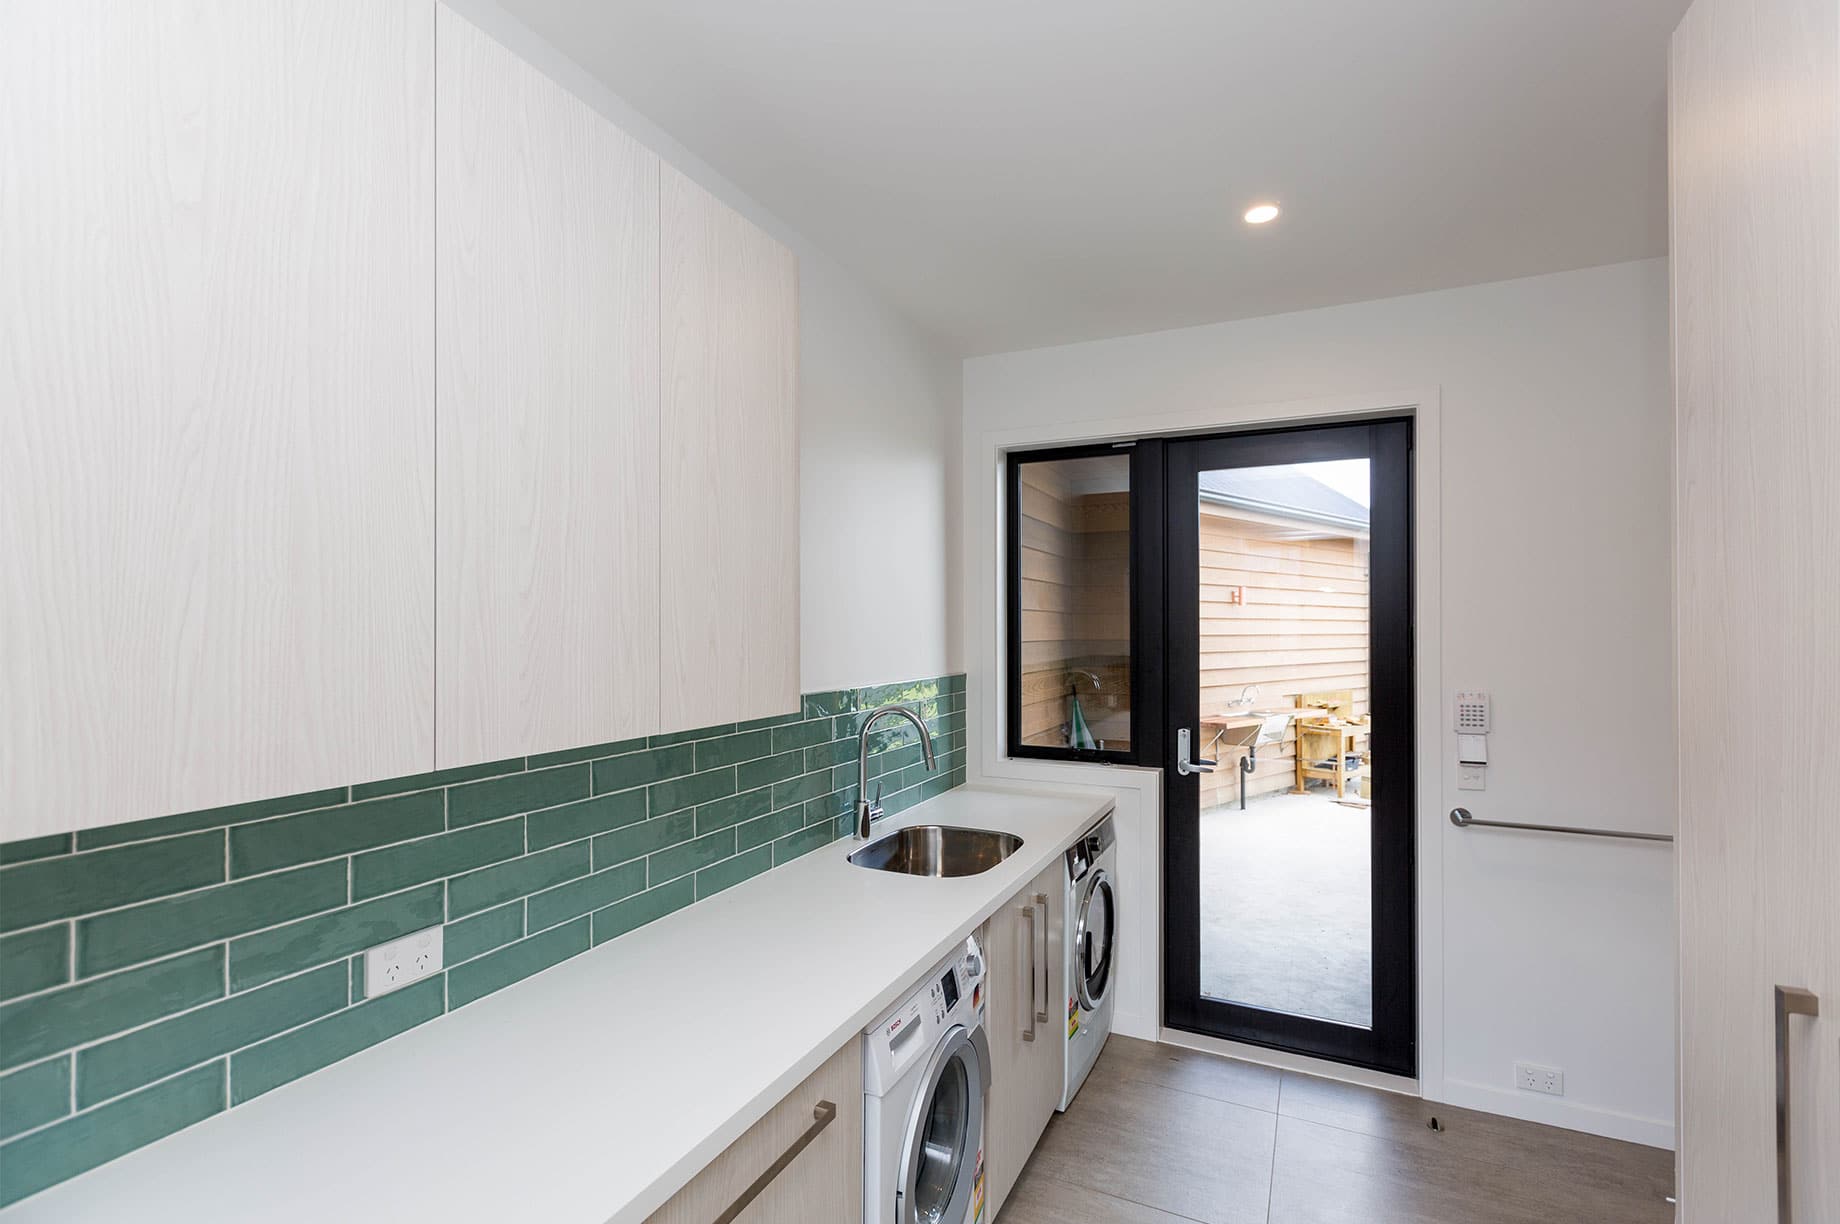 Manawatu home laundry room with teal tiles